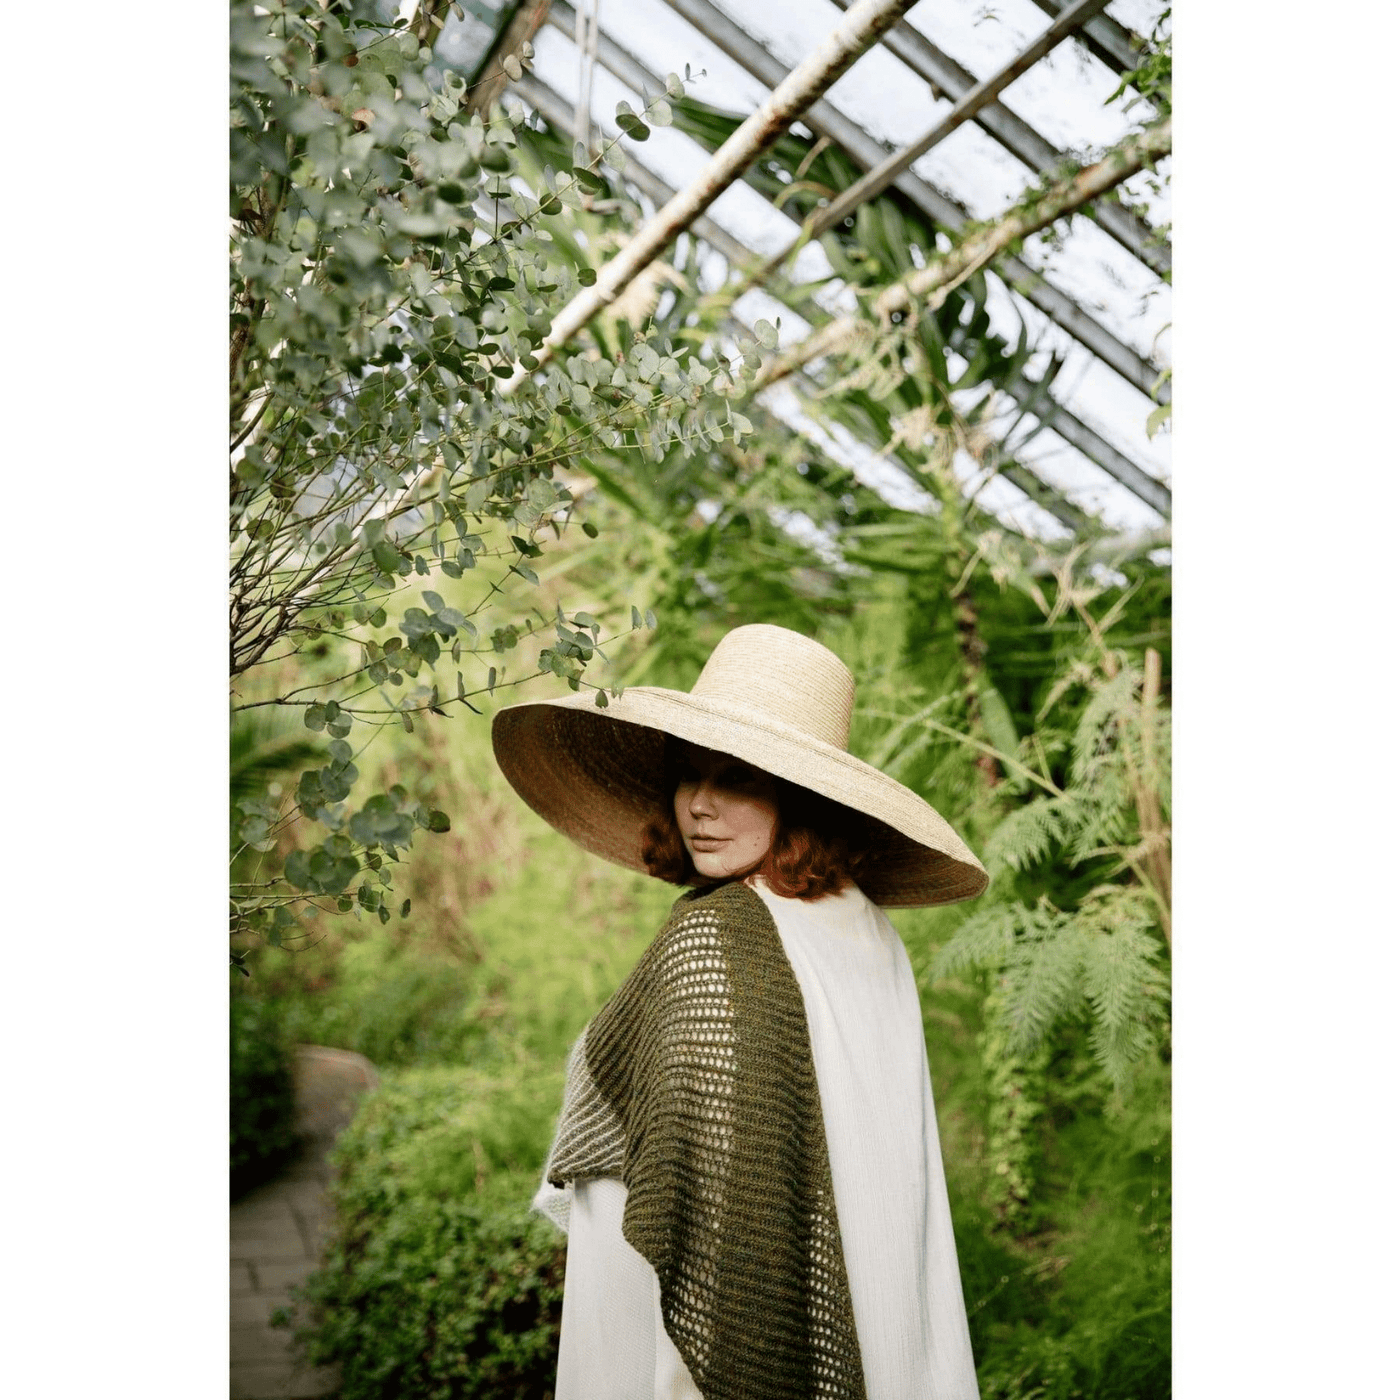 The Woolly Thistle Products Laine Magazine, Issue 11 Summer 2021 Nordic Knit Life woman wearing green knitted shawl